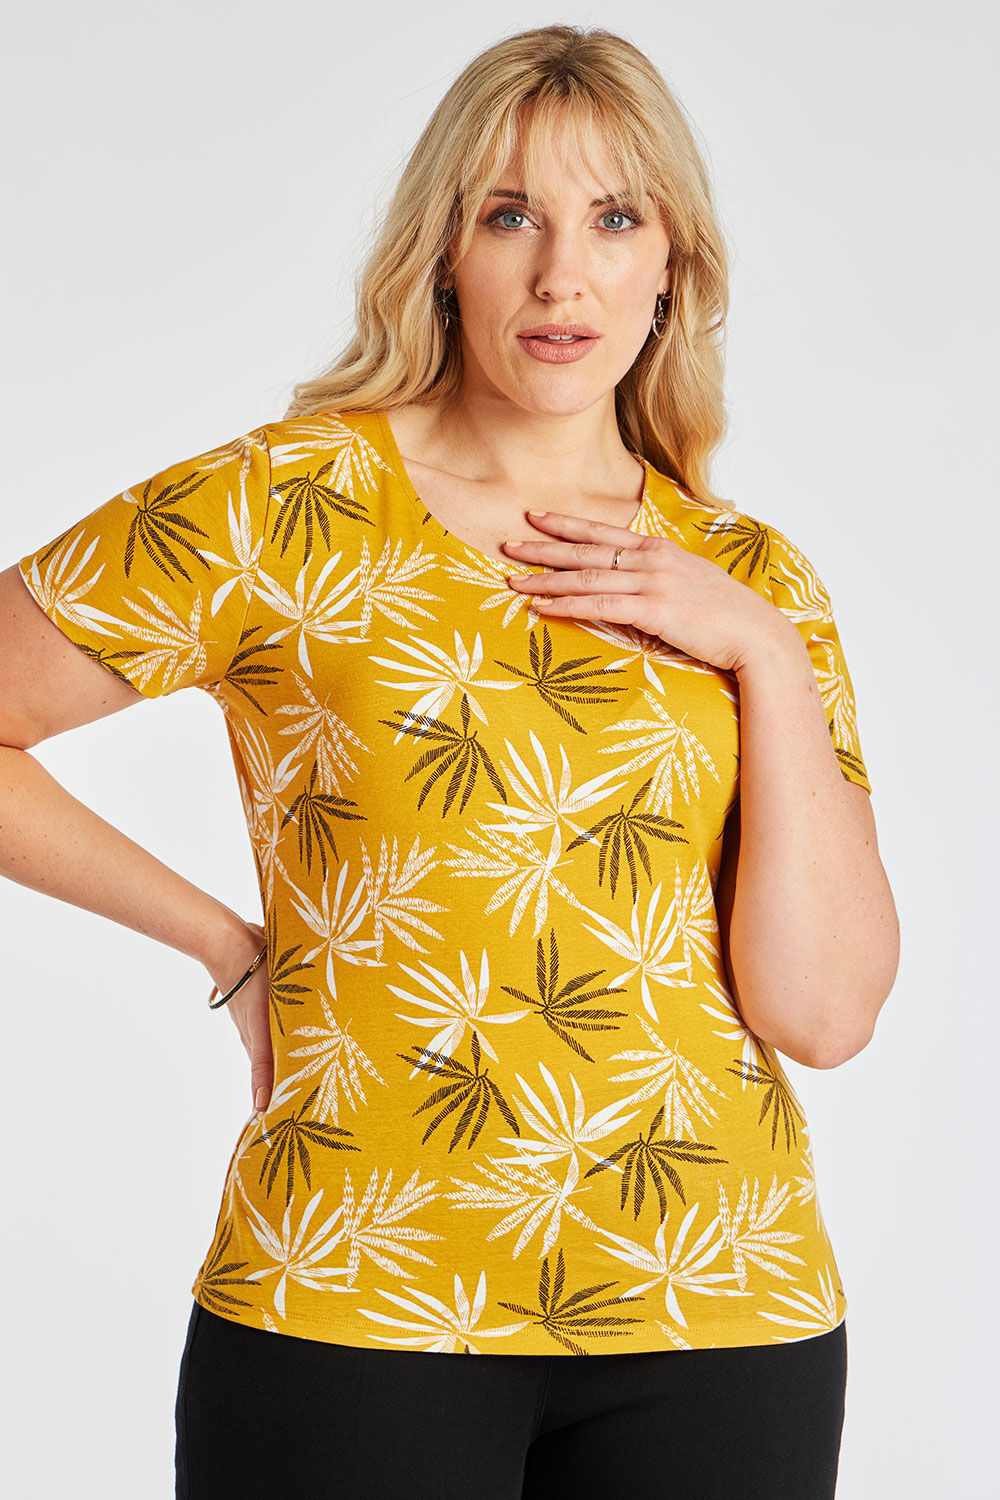 Bonmarche Yellow Short Sleeve Palm Print T-Shirt With Scoop Neckline, Size: 18